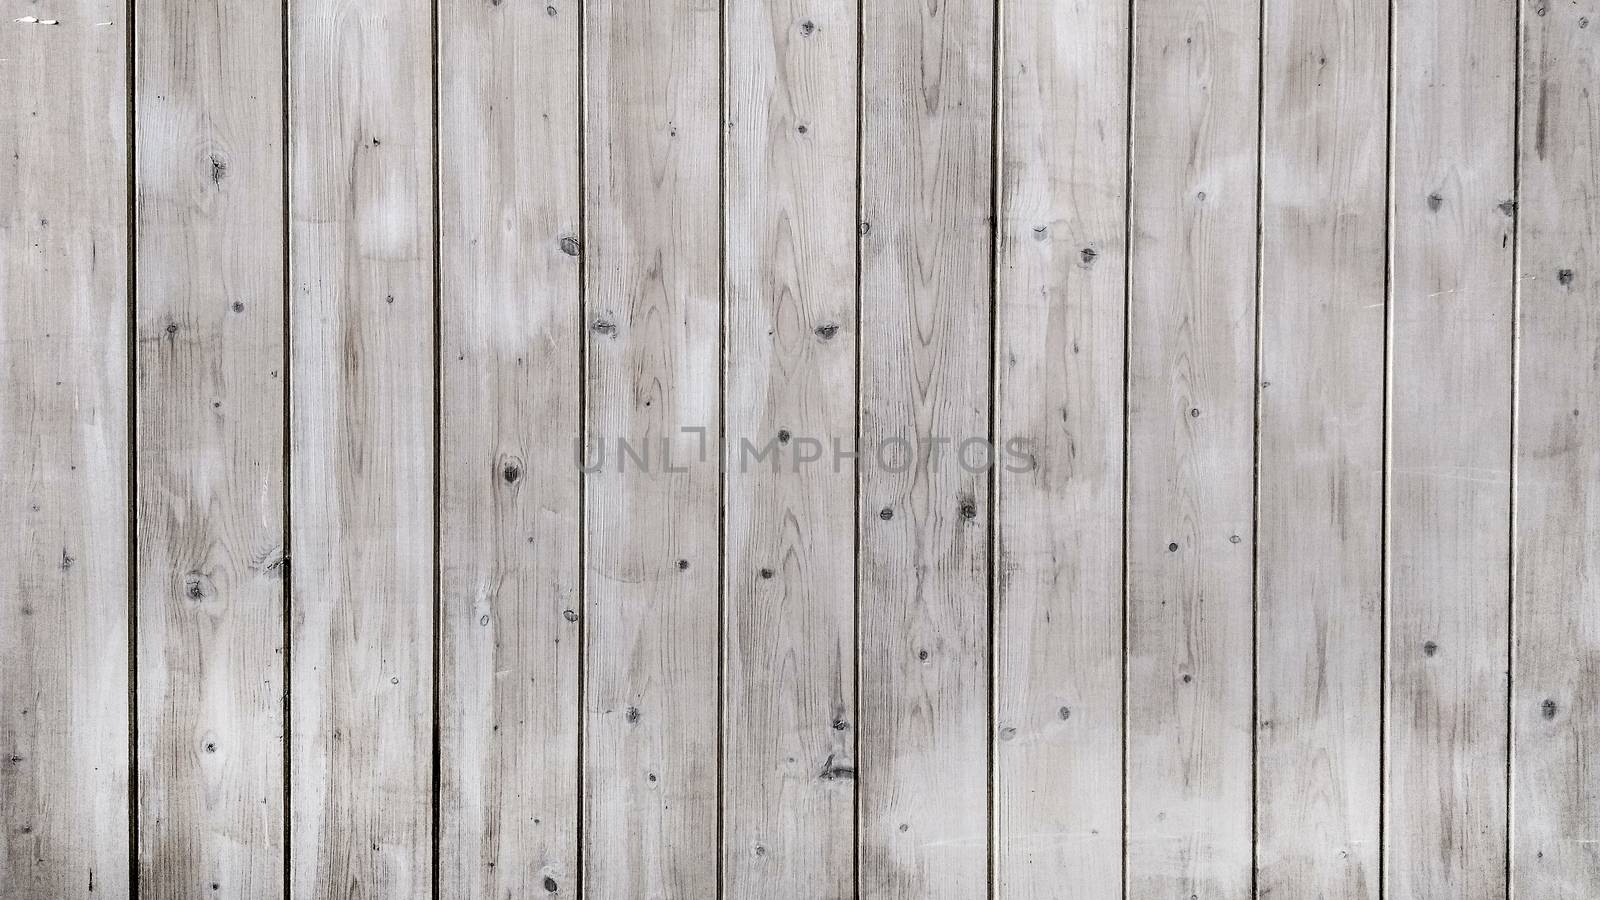 Shabby chic style wooden background composed by planks